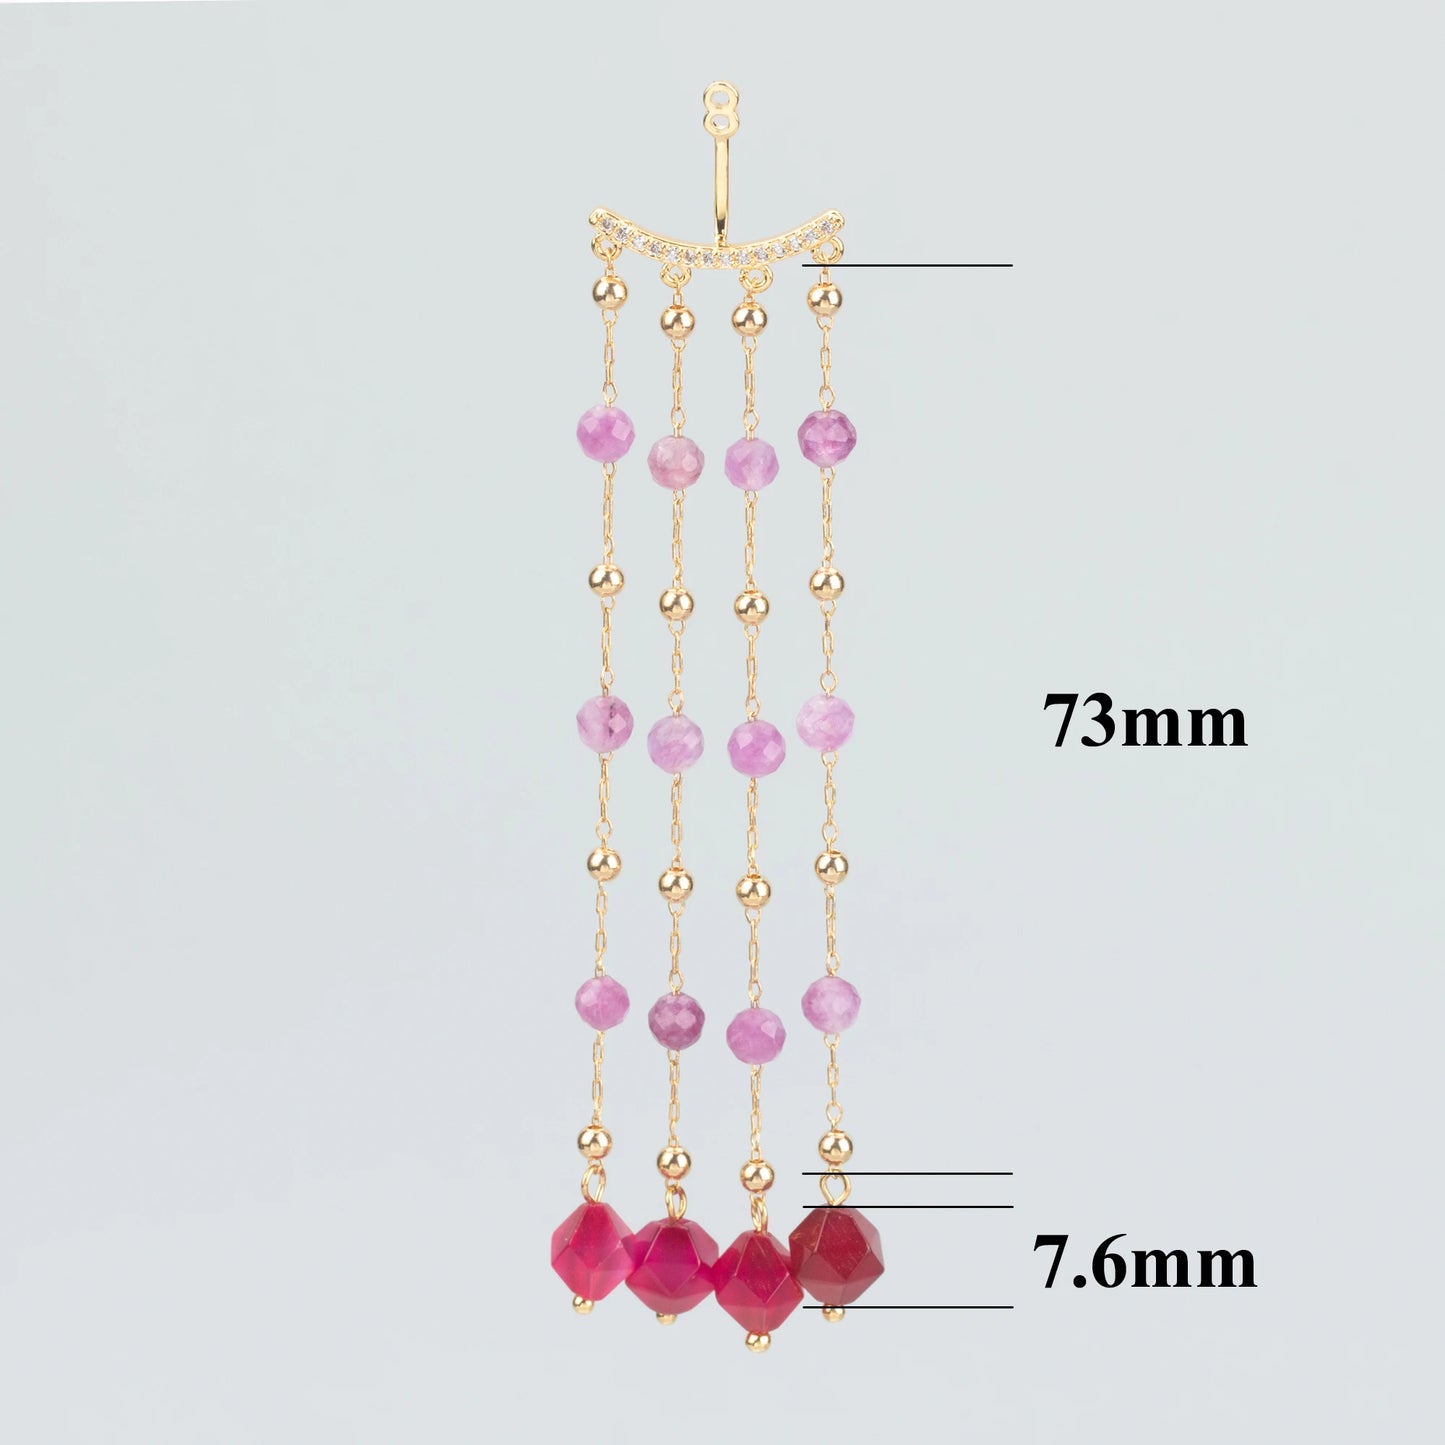 GUFEATHER MA93,women's straight hanging earrings,nickel free,18k gold plated,copper,natual stone,ear chain,drop earring,one pair